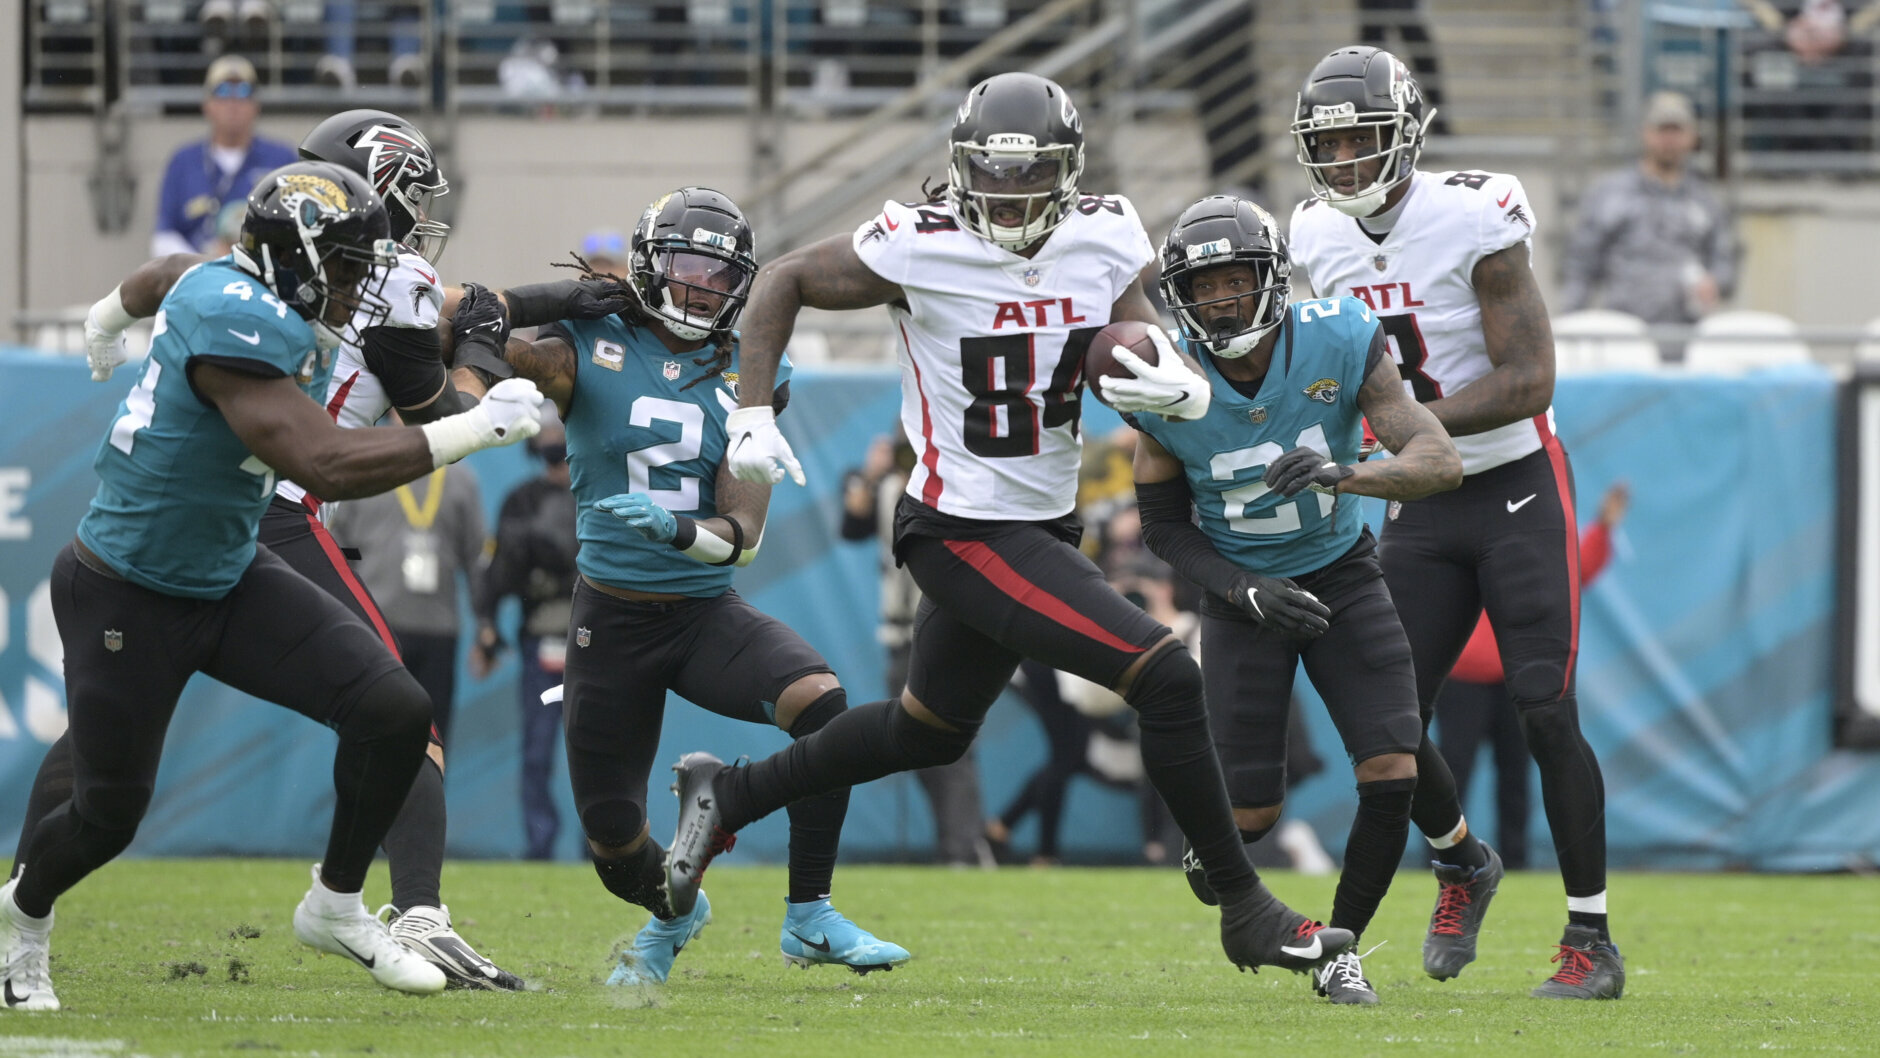 <p><em><strong>Falcons 21</strong></em><br />
<em><strong>Jaguars 14</strong></em></p>
<p>Cordarrelle Patterson had the best cleats of the week and then scored the two touchdowns that proved to be the difference in the game. Baller move.</p>
<blockquote class="twitter-tweet" data-width="500" data-dnt="true">
<p lang="en" dir="ltr">Cordarrelle Patterson honored Ahmaud Arbery on Sunday.</p>
<p>(📸 <a href="https://twitter.com/AtlantaFalcons?ref_src=twsrc%5Etfw">@AtlantaFalcons</a>) <a href="https://t.co/nUYl1o87sh">pic.twitter.com/nUYl1o87sh</a></p>
<p>&mdash; SportsCenter (@SportsCenter) <a href="https://twitter.com/SportsCenter/status/1465021925143592961?ref_src=twsrc%5Etfw">November 28, 2021</a></p></blockquote>
<p><script async src="https://platform.twitter.com/widgets.js" charset="utf-8"></script></p>
